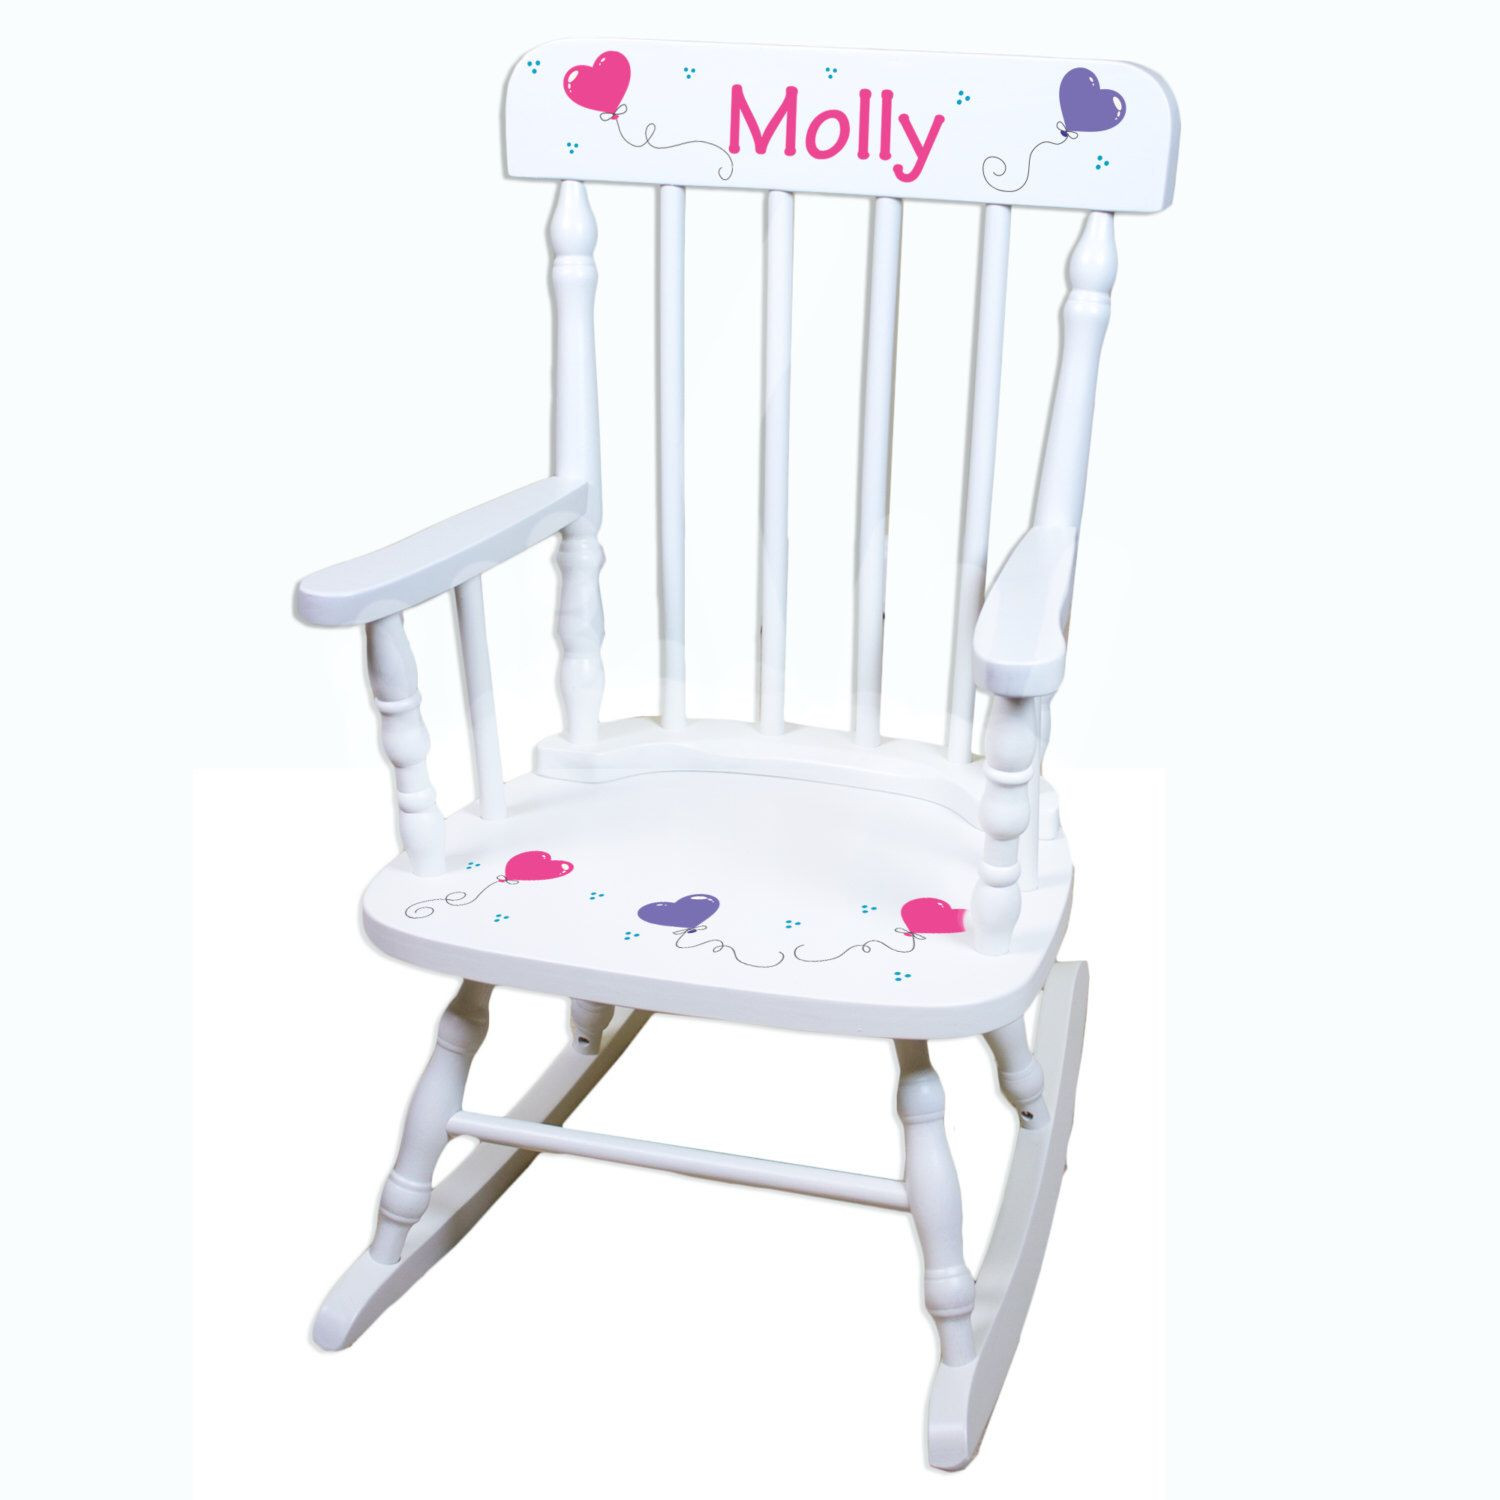 Personalized Kids Rocking Chair
 Hand Painted Personalized Childs White Spindle Rocking